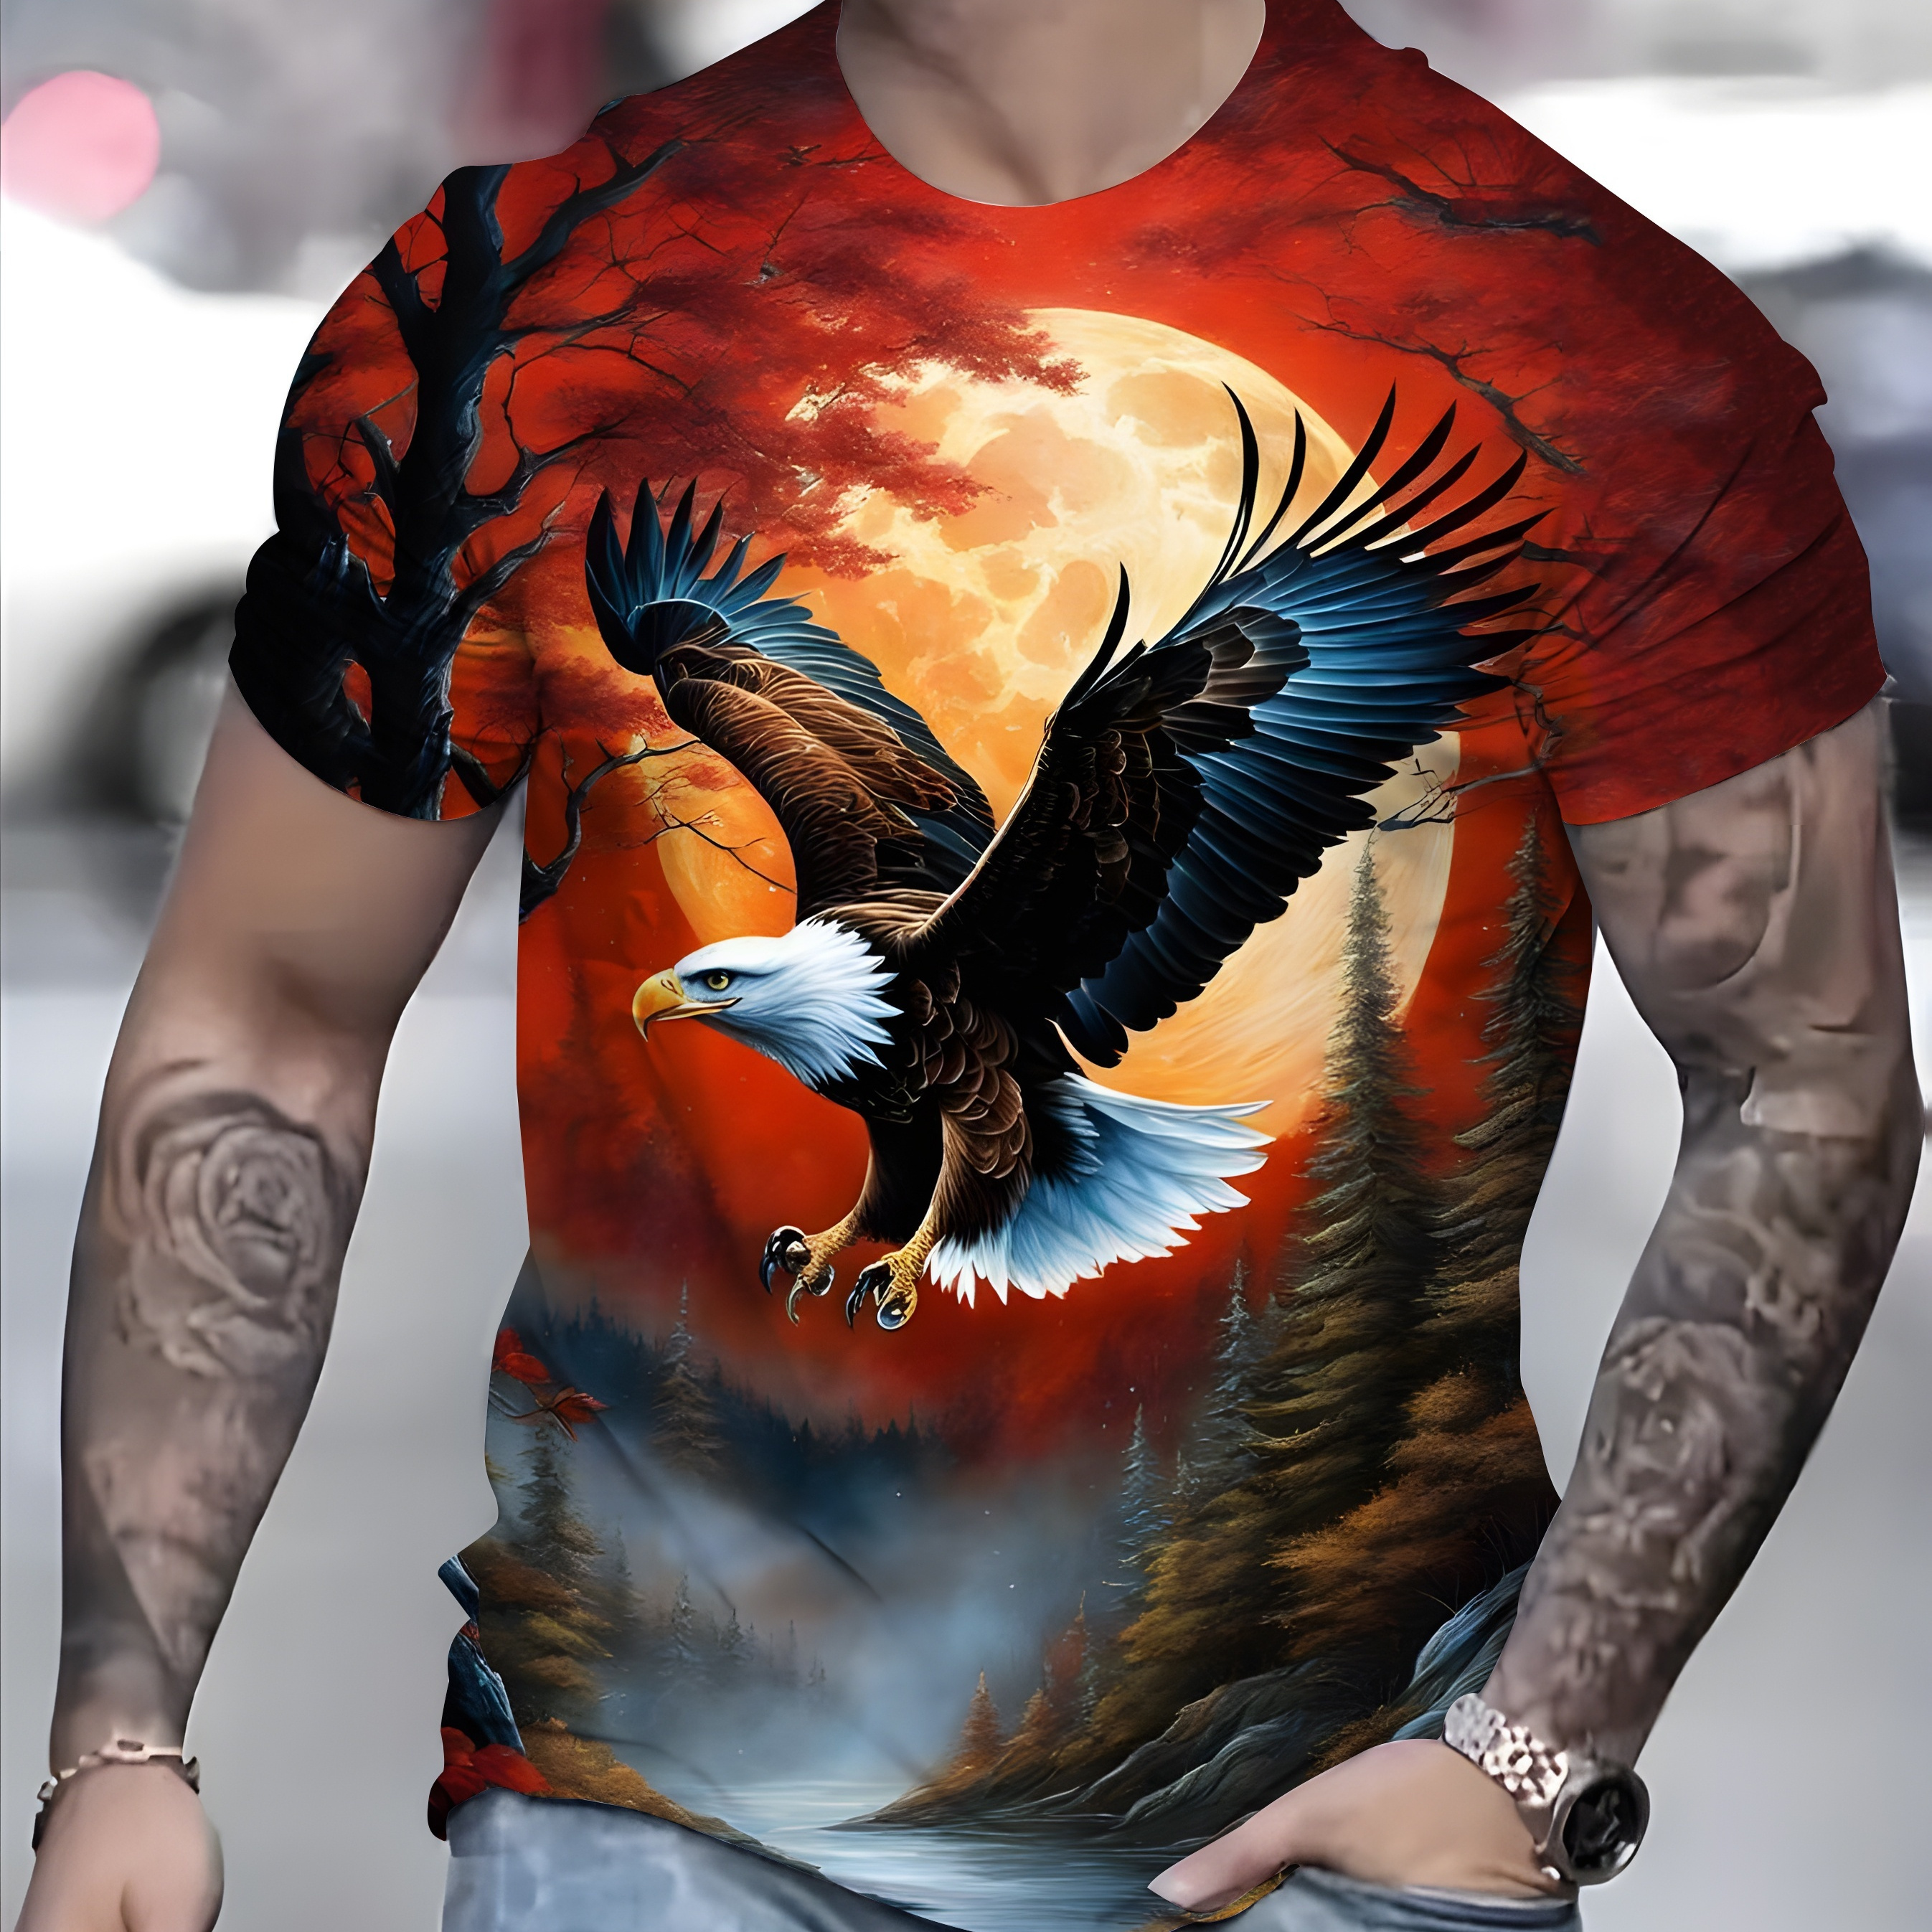 

Eagle Pattern 3d Printed Crew Neck Short Sleeve T-shirt For Men, Casual Summer T-shirt For Daily Wear And Vacation Resorts